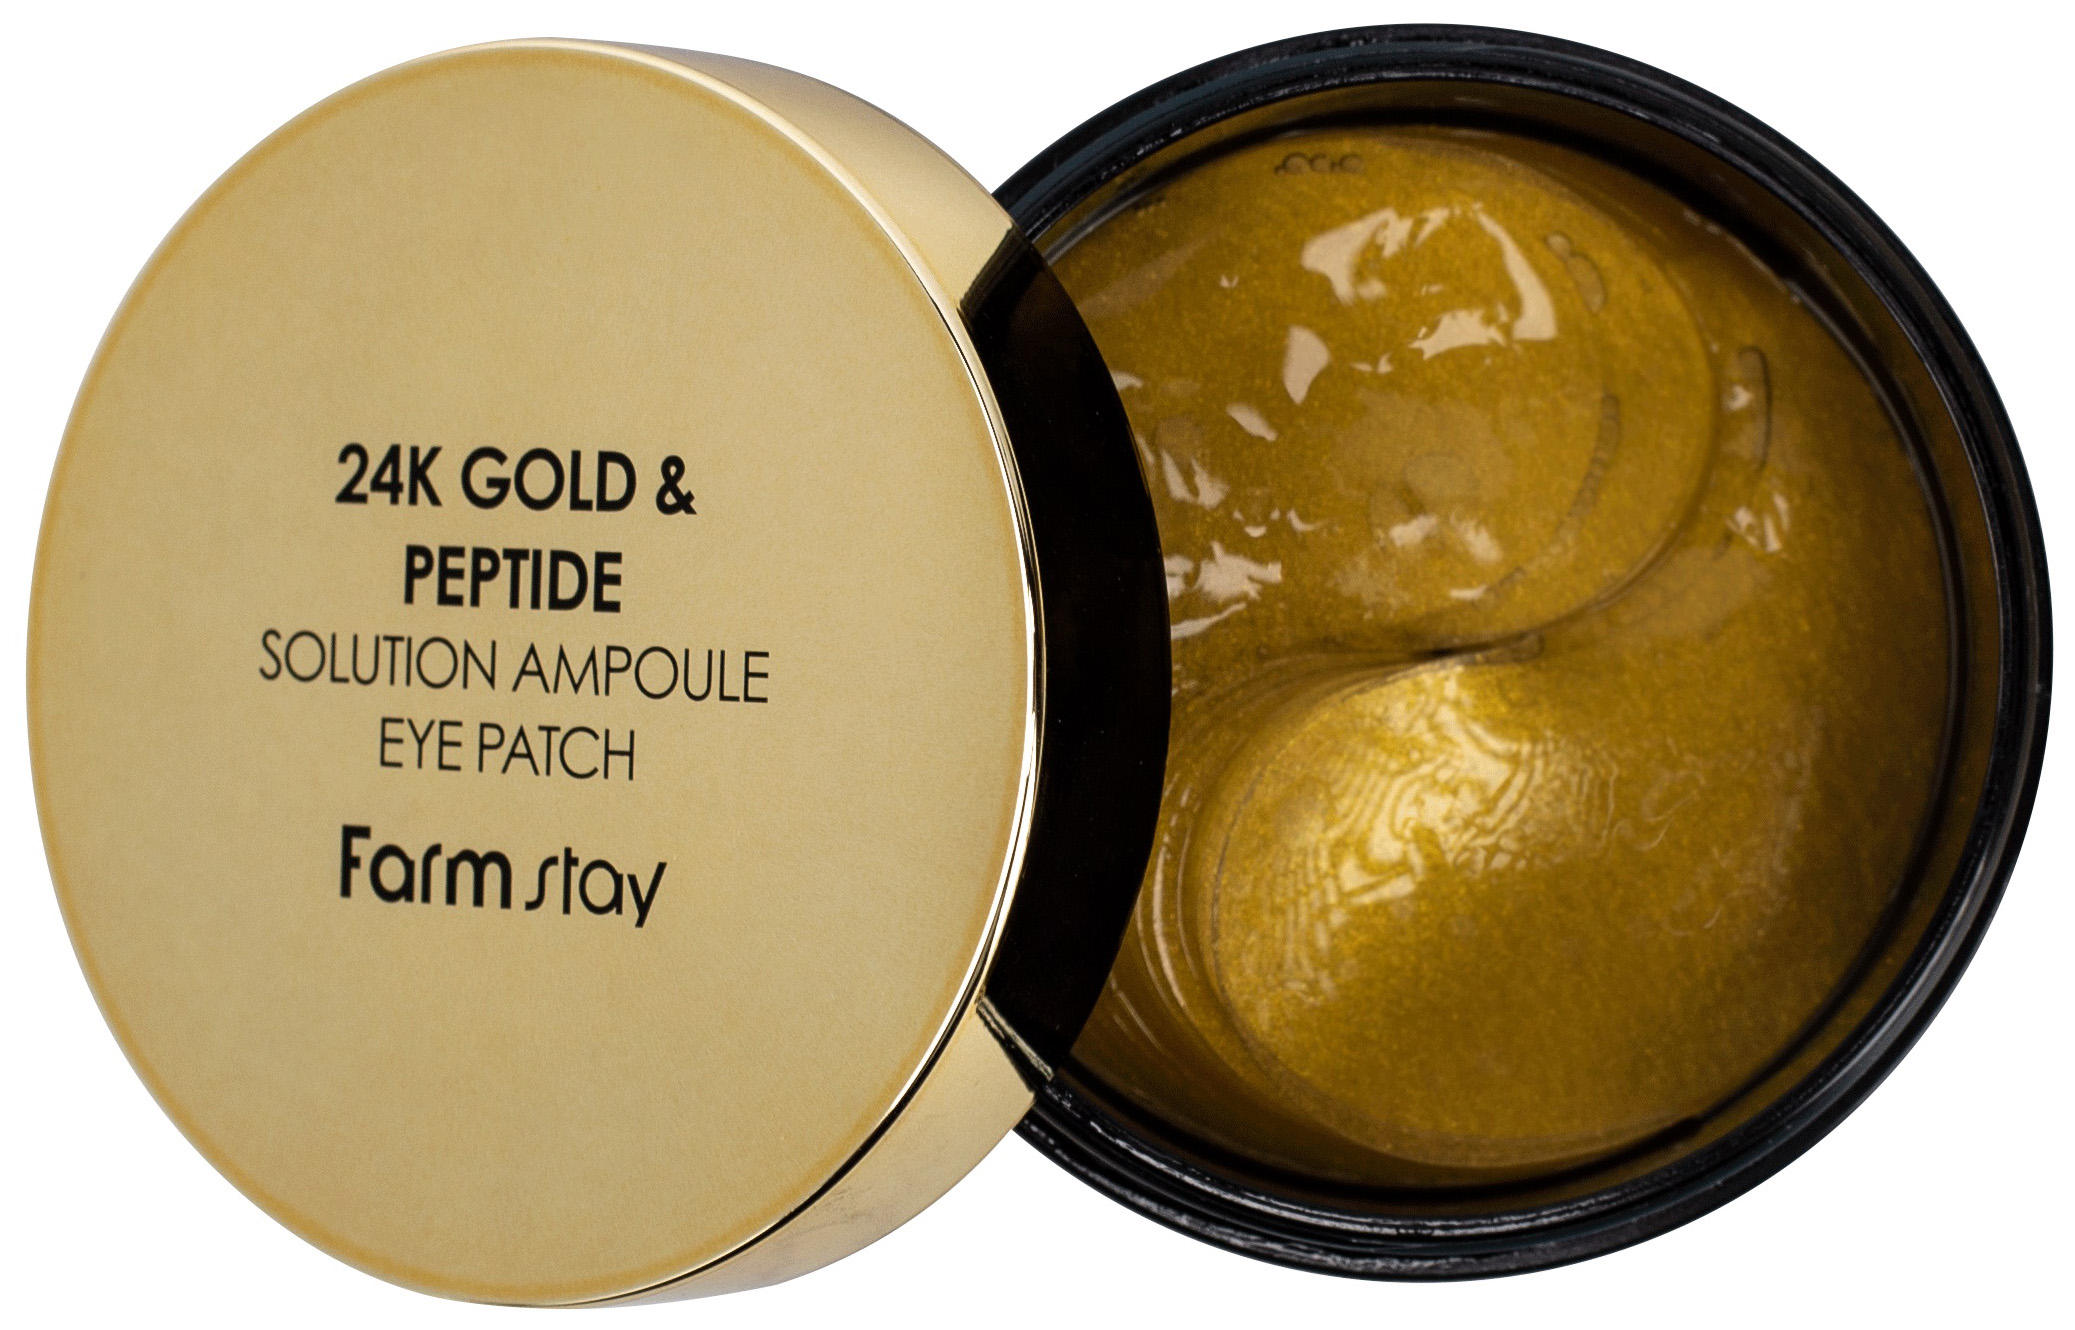 Патчи для глаз Farm Stay 24K Gold & Peptide Solution Ampoule Eye Patch 90 г жидкие пептидные патчи peptide eye patch